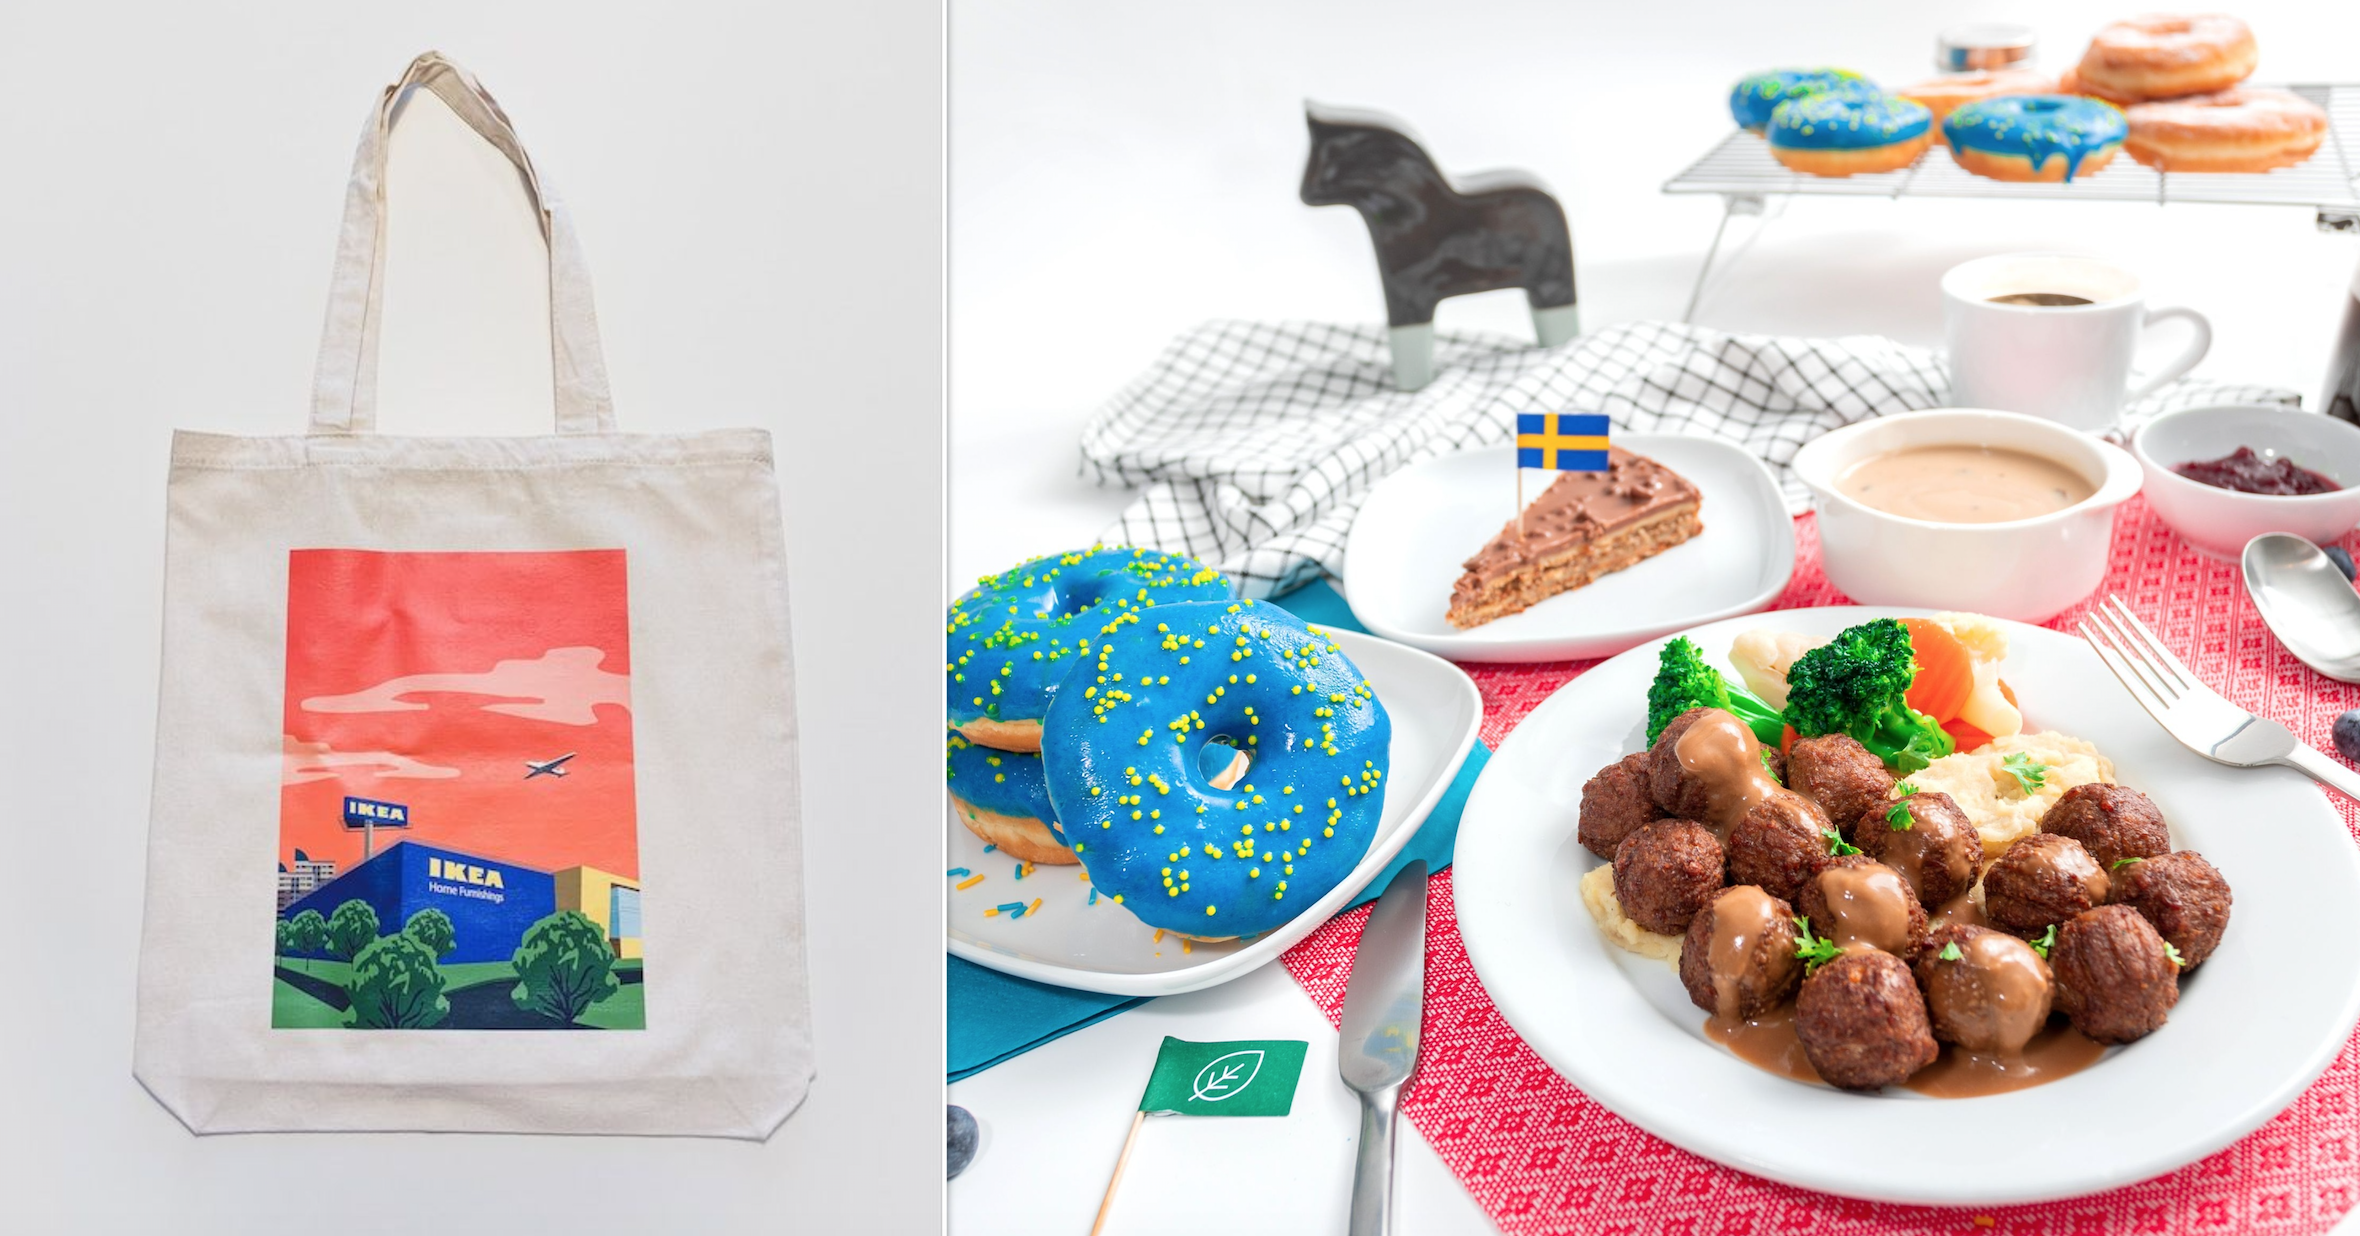 jaloezie Reductor Vegen New donut, free tote bags & S$1.50 almond chocolate cake at IKEA S'pore  from Oct. 21-24, 2021 - Mothership.SG - News from Singapore, Asia and  around the world